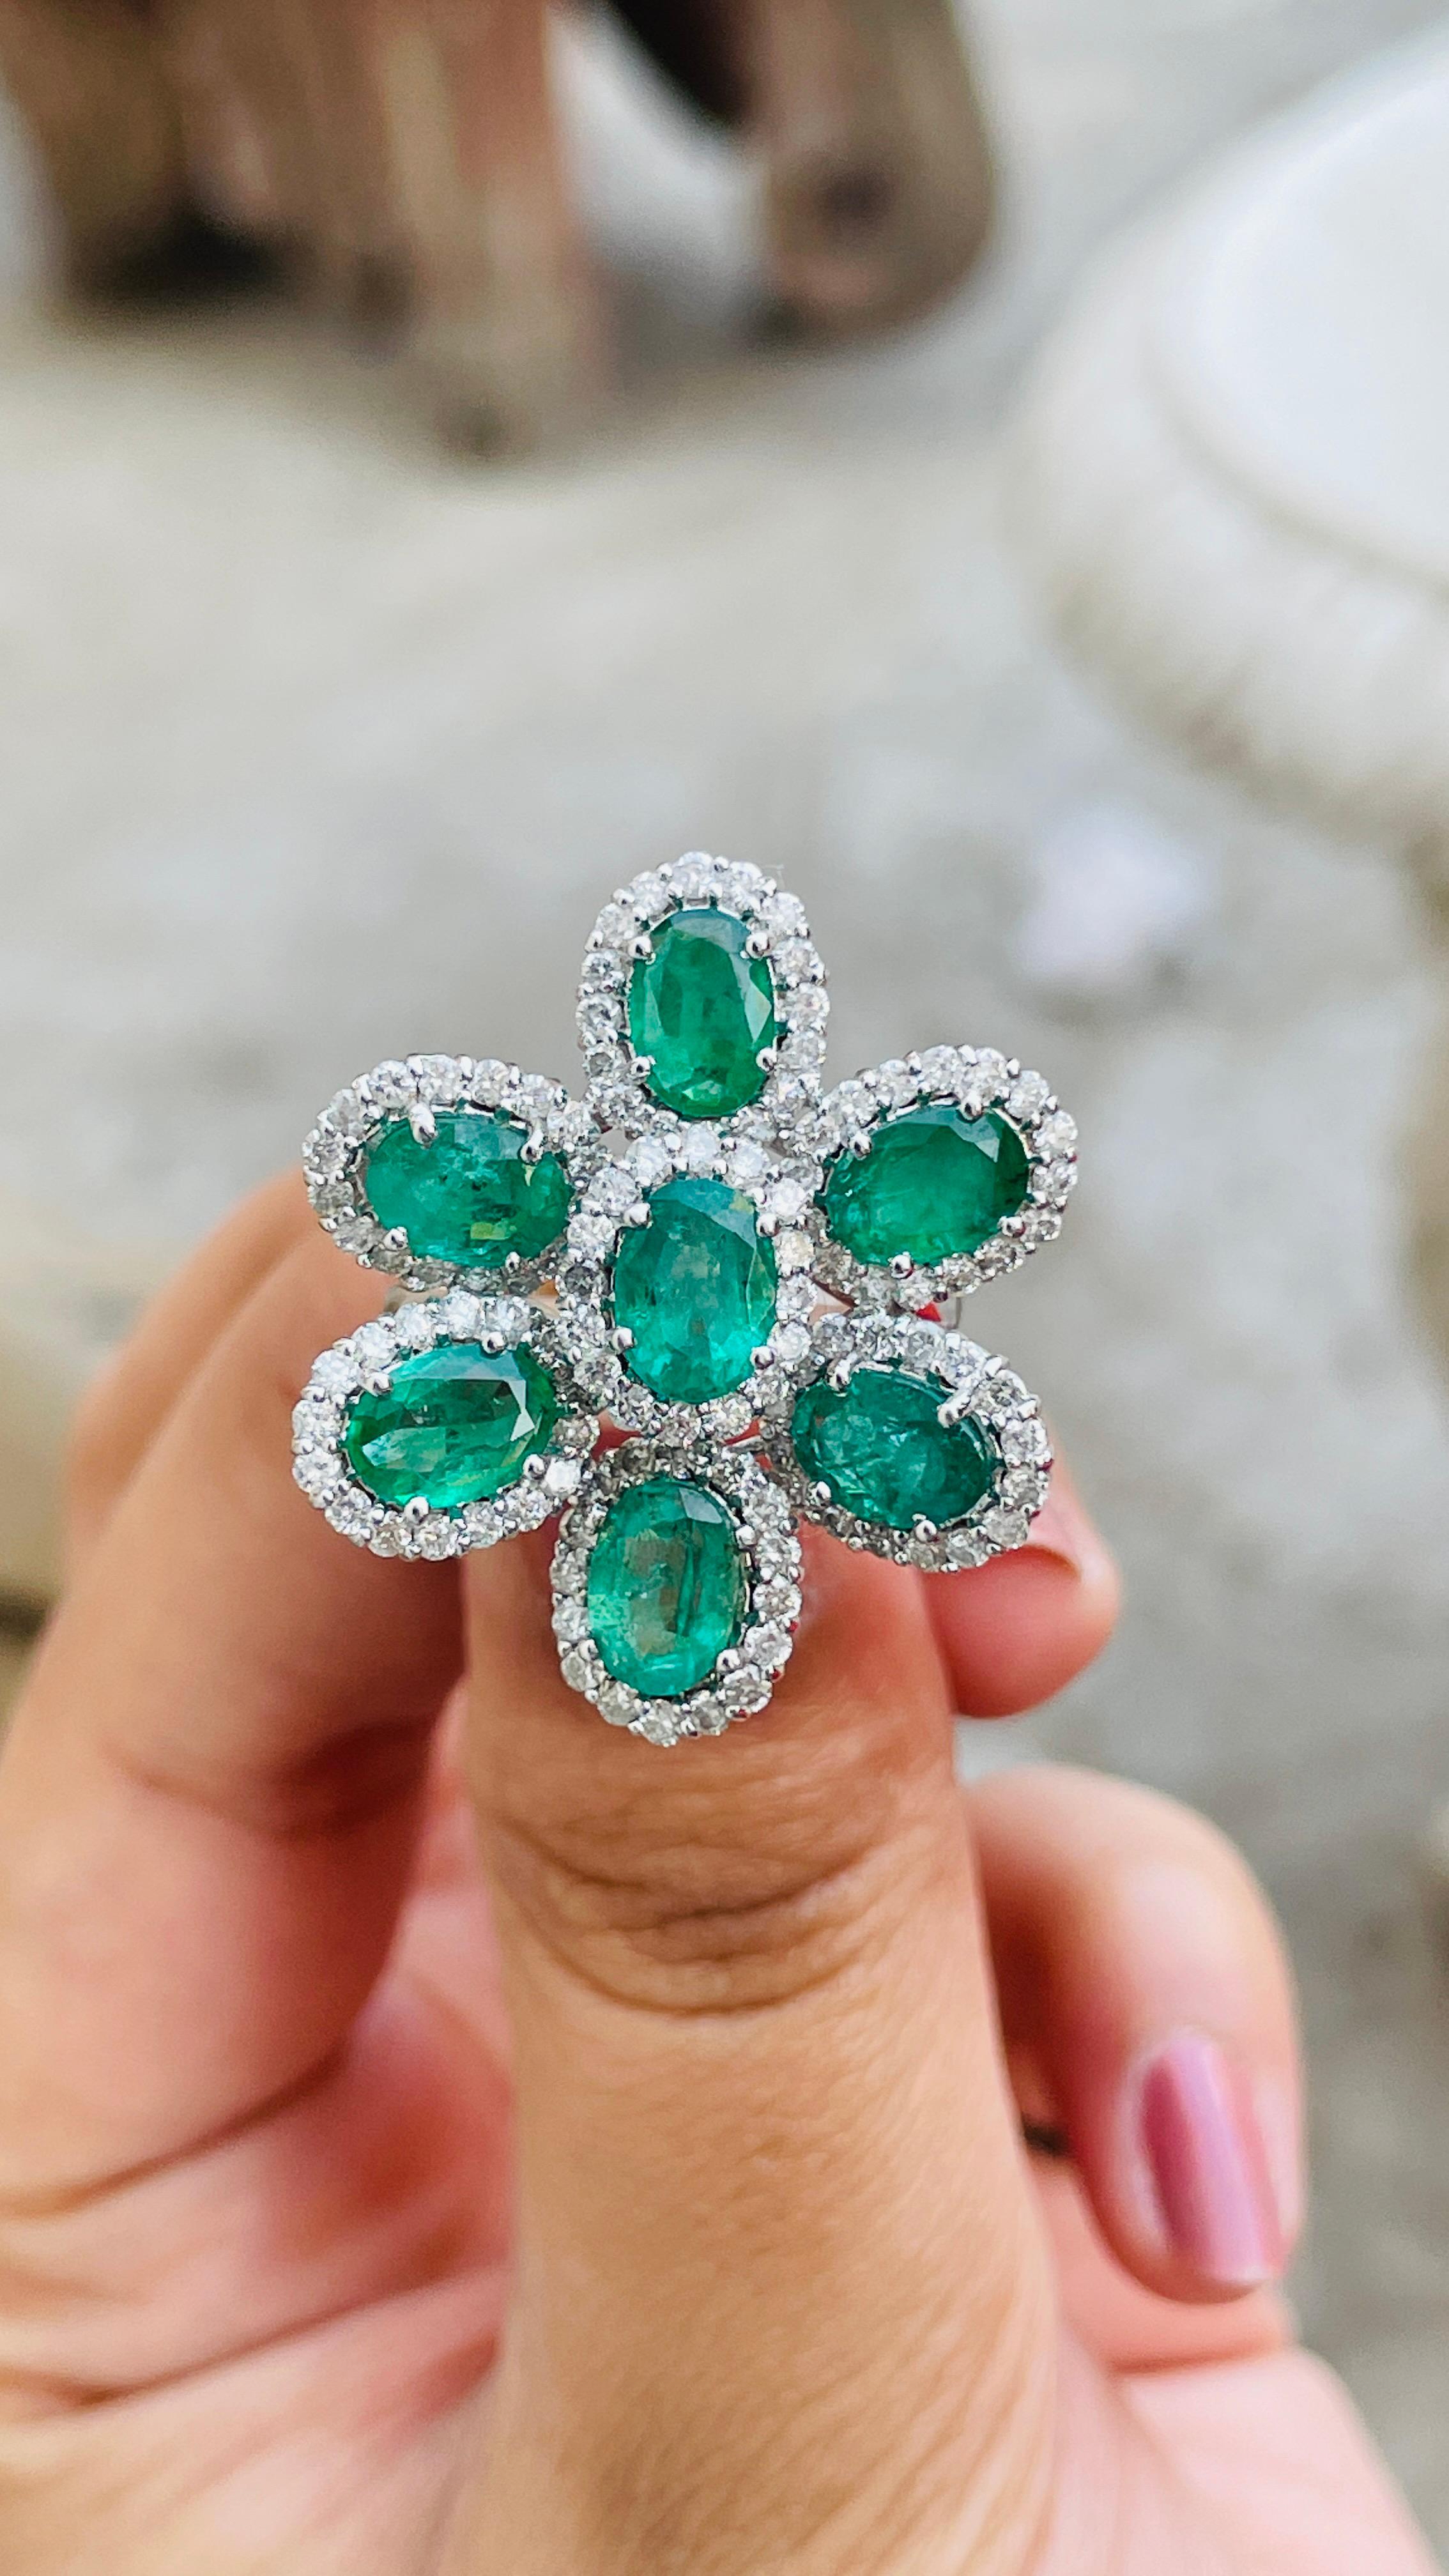 For Sale:  Statement 5 ct Emerald Flower Ring with Halo Diamonds in 14 Karat White Gold 8